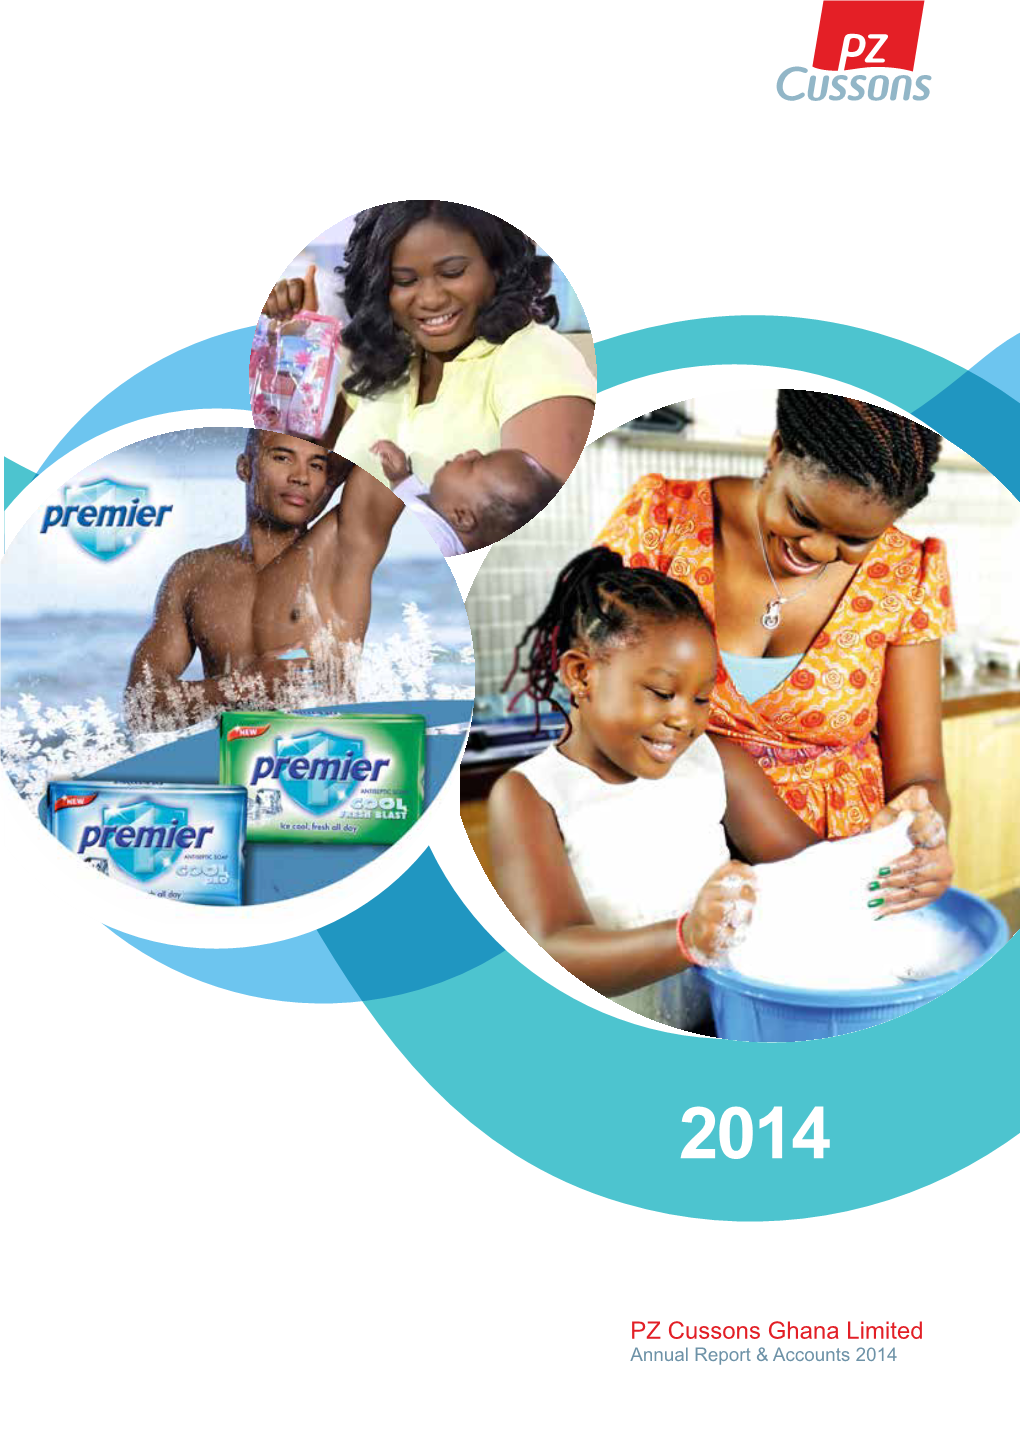 PZ Cussons Ghana Limited Annual Report & Accounts 2014 ANNUAL REPORT and FINANCIAL STATEMENTS for the YEAR ENDED 31 MAY 2014